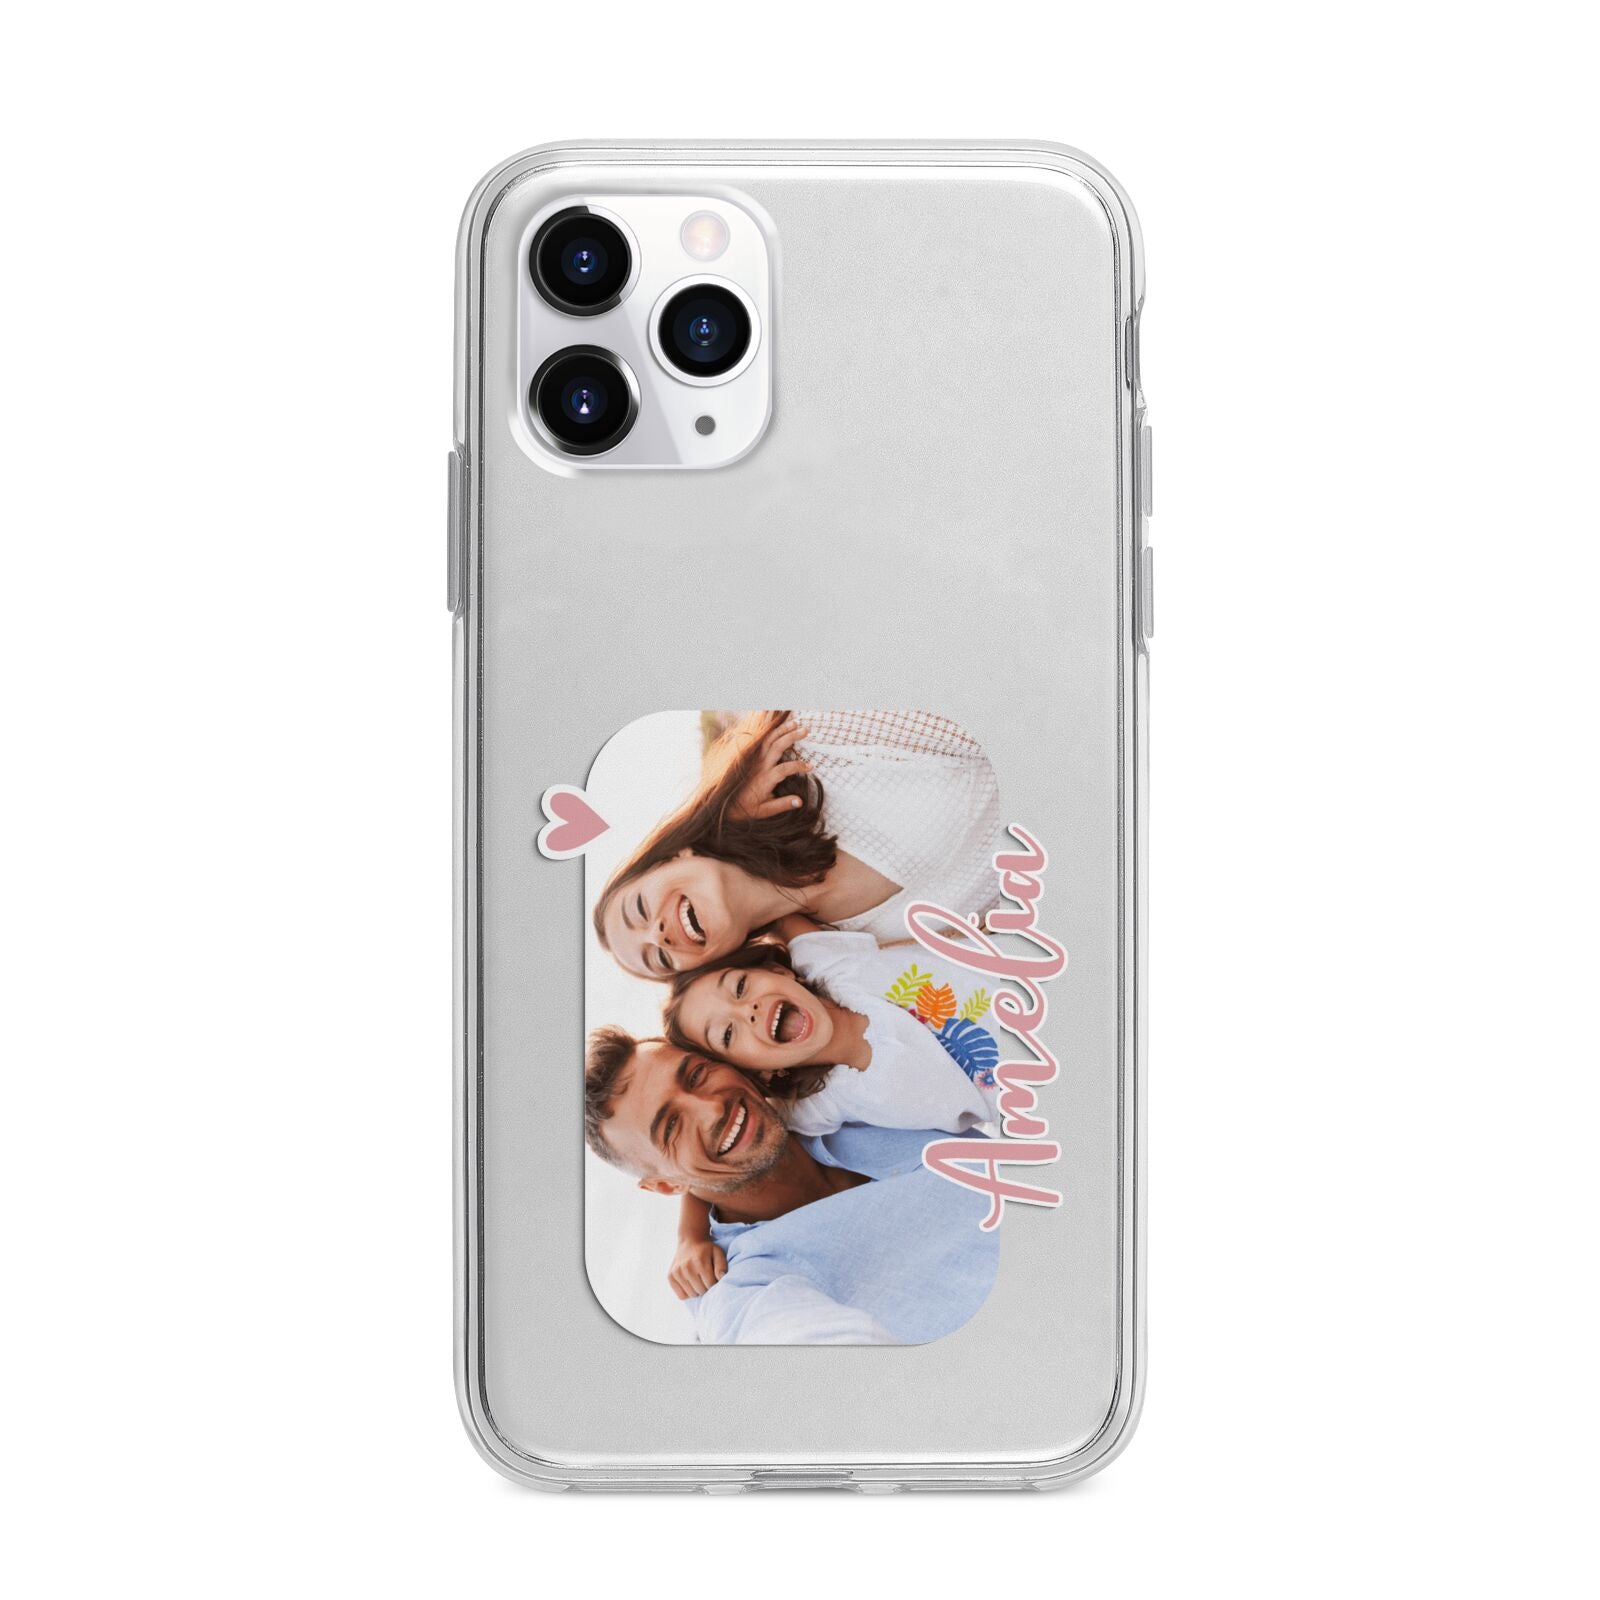 Family Photo Personalised Apple iPhone 11 Pro Max in Silver with Bumper Case